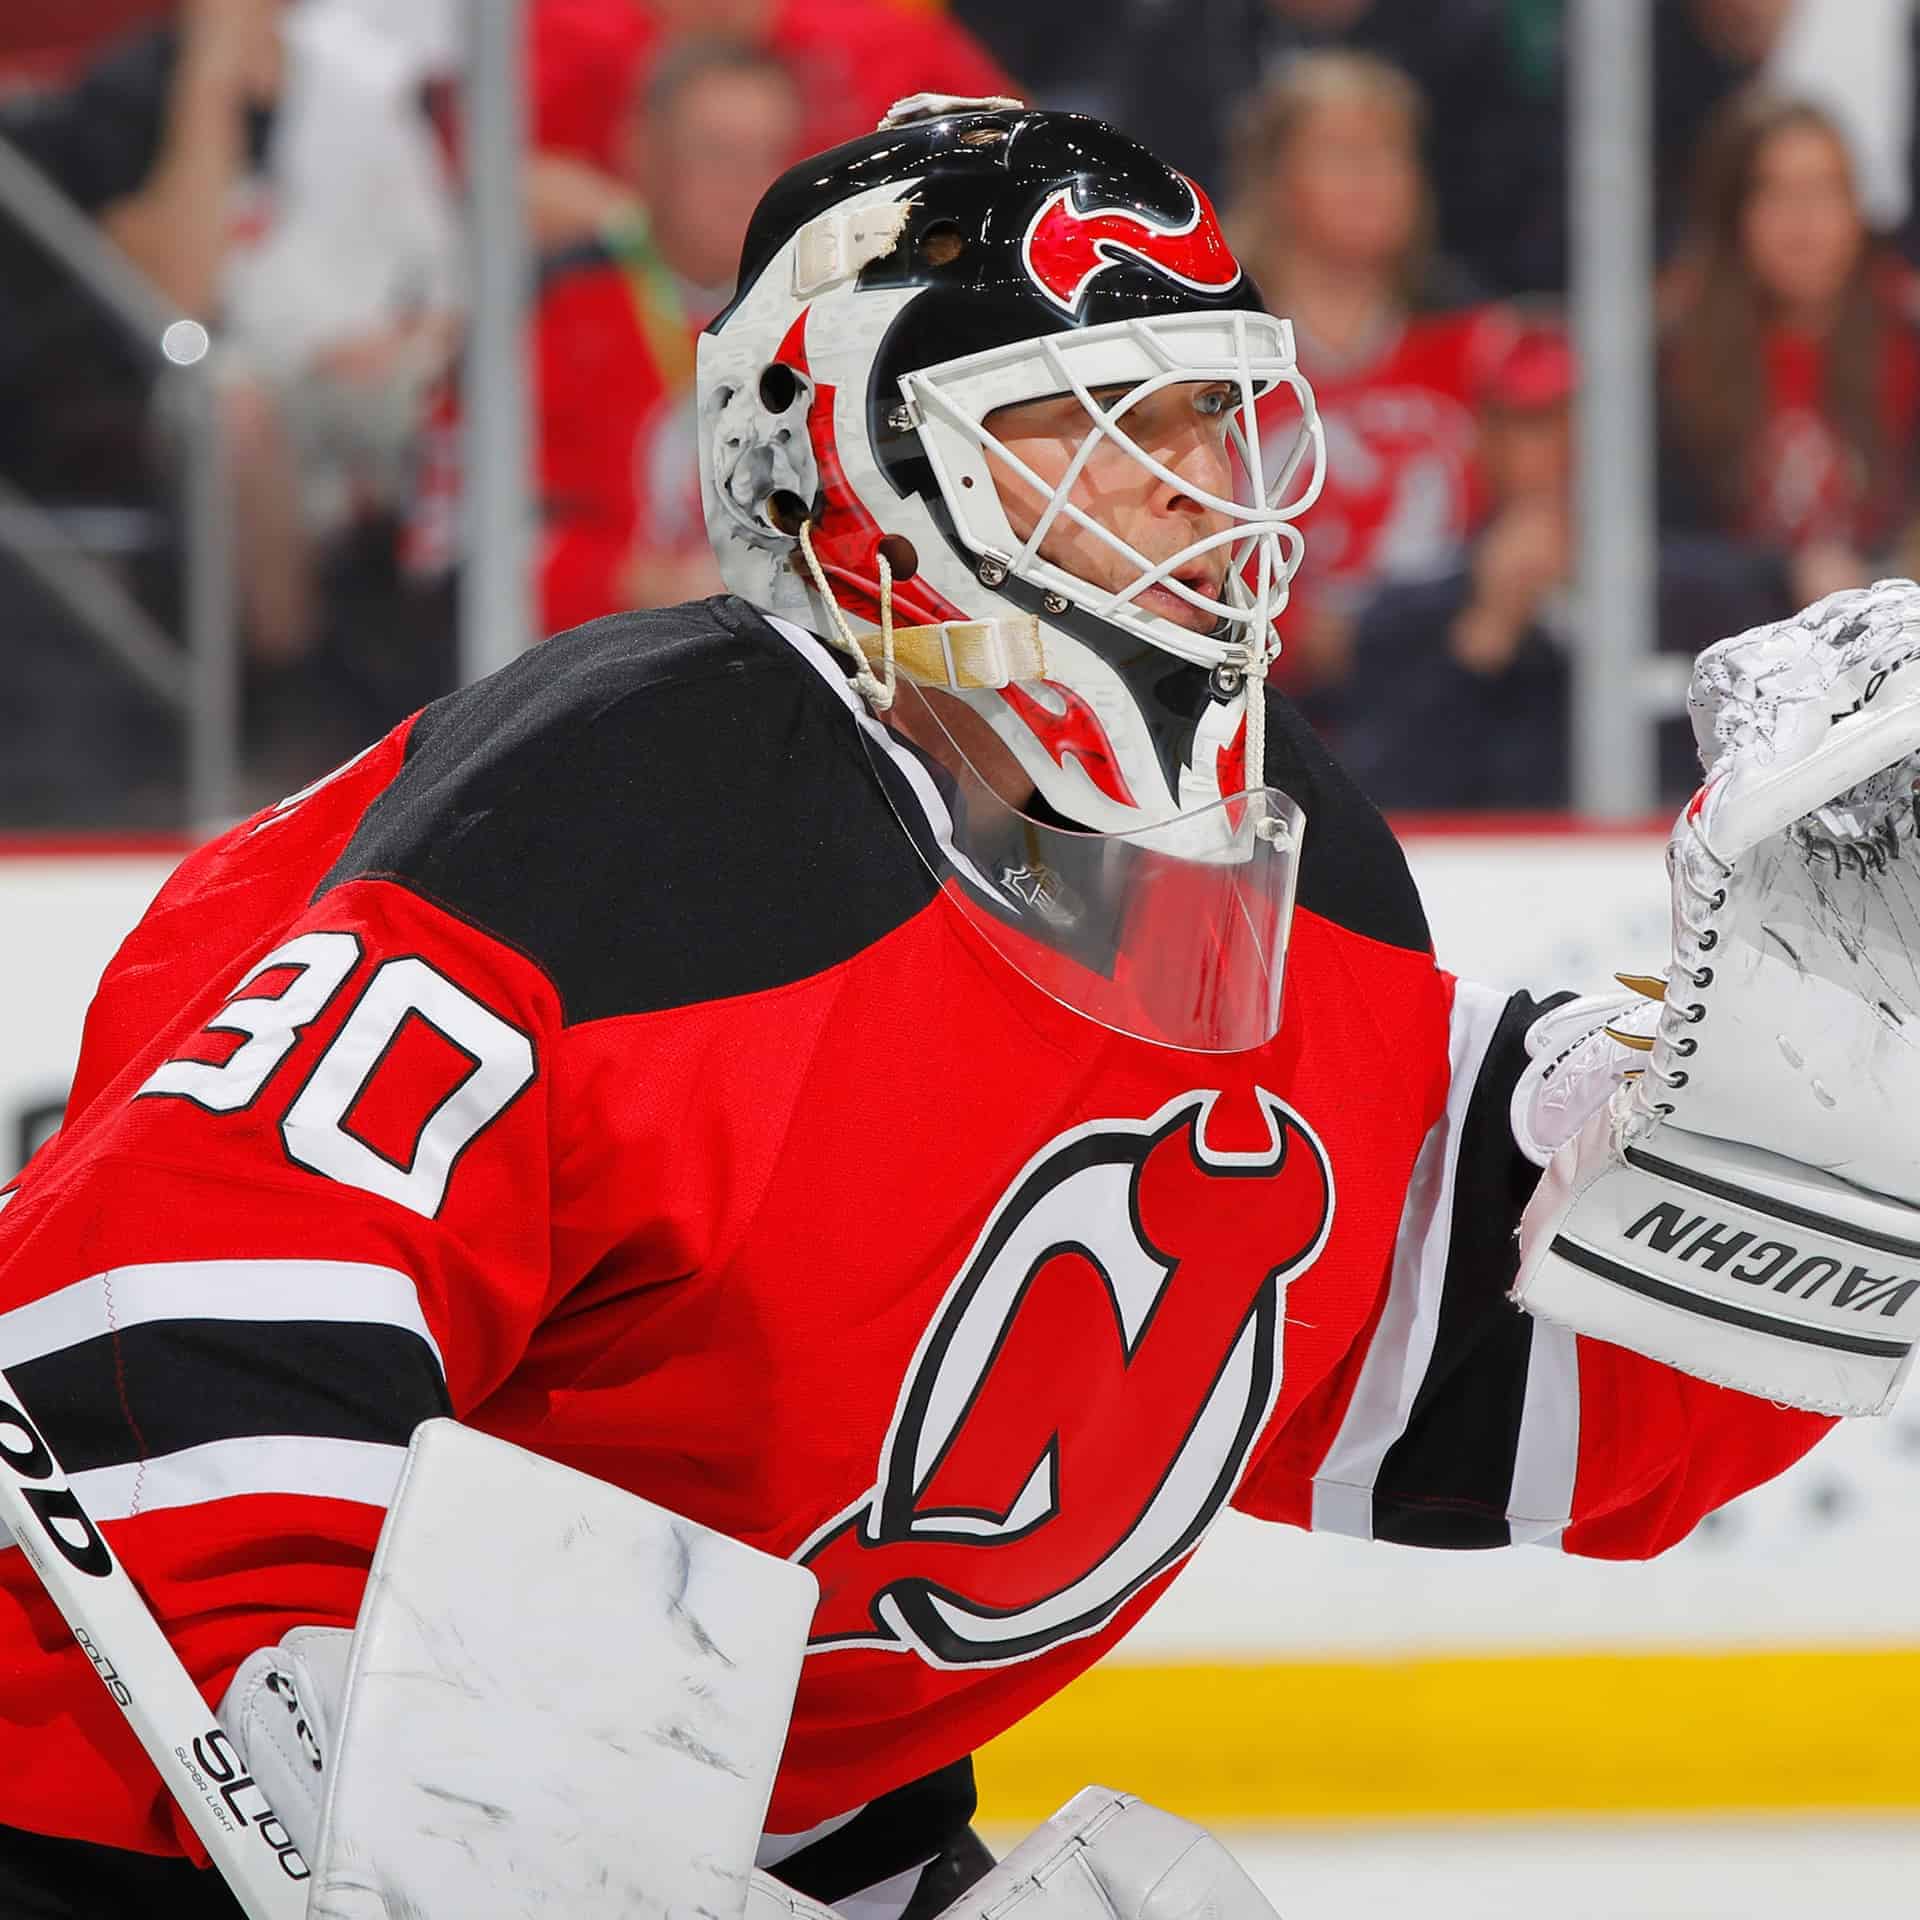 New Jersey Devils: Martin Brodeur was in the HOF before he even retired